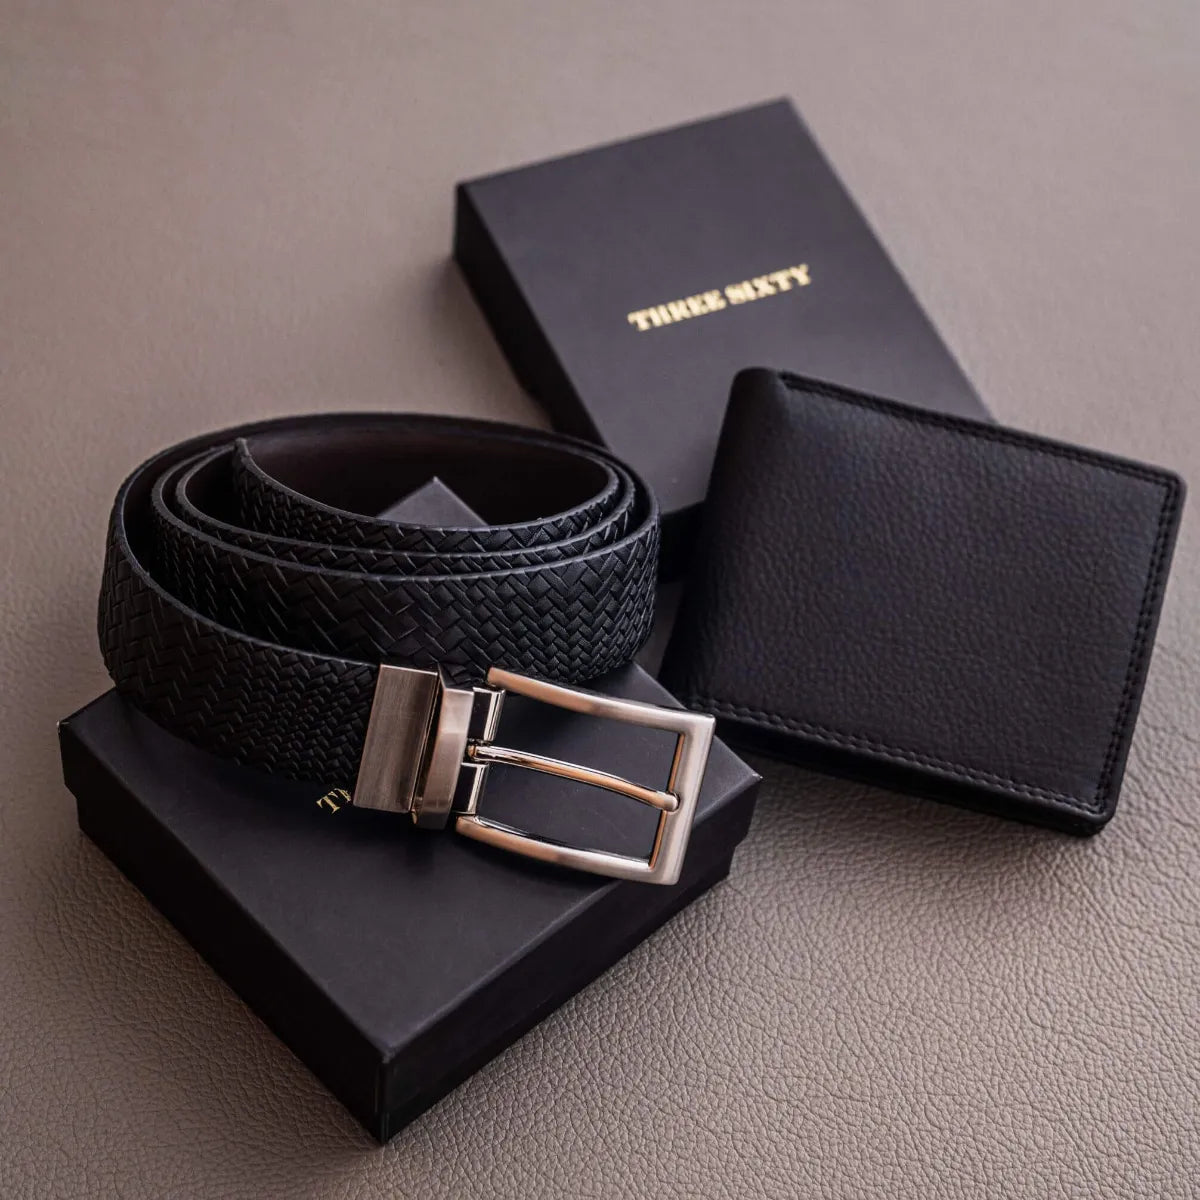 Leather belt and wallet combo for men